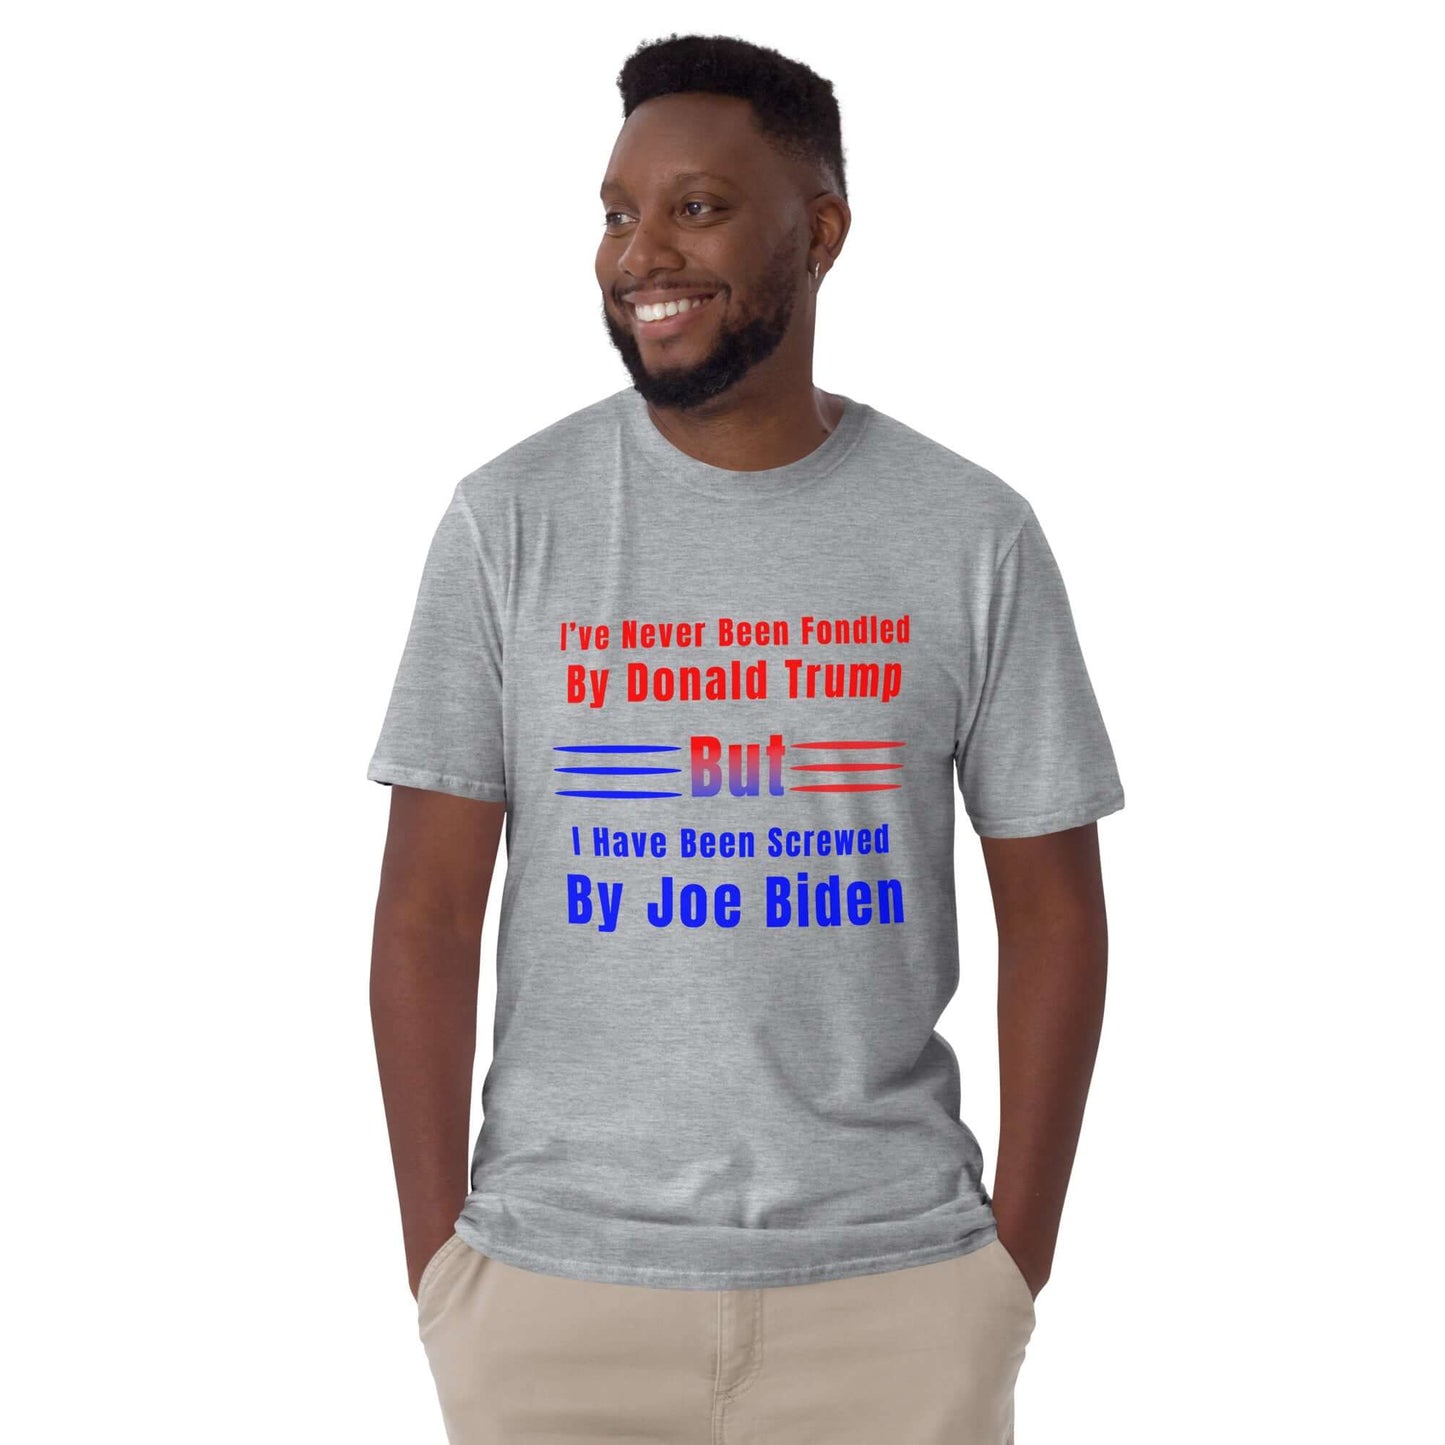 Screwed by Joe Biden - Short-Sleeve Unisex T-Shirt biden bidens america dads day Fahters day gift for dad gift for grandpa gift for her gift for him gift for husband gift for sister gift for wife hand made Handmade horrible designs horribledesigns liberal tears made in USA maga moms day moms gift small business super dad Trump Unique gift